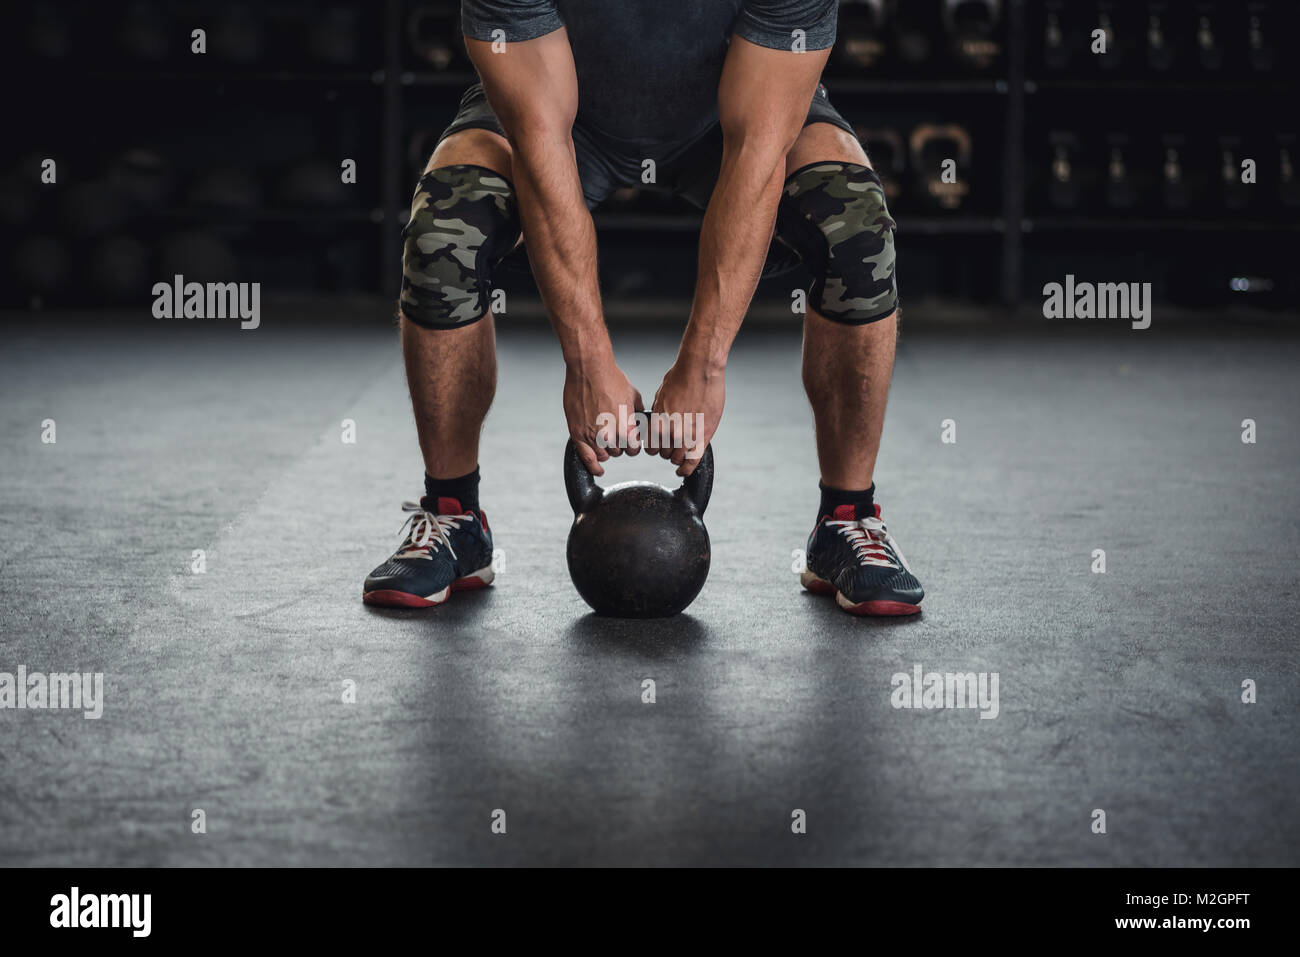 Weightlifting, powerlifting, crossfit, strength training. Stock Photo